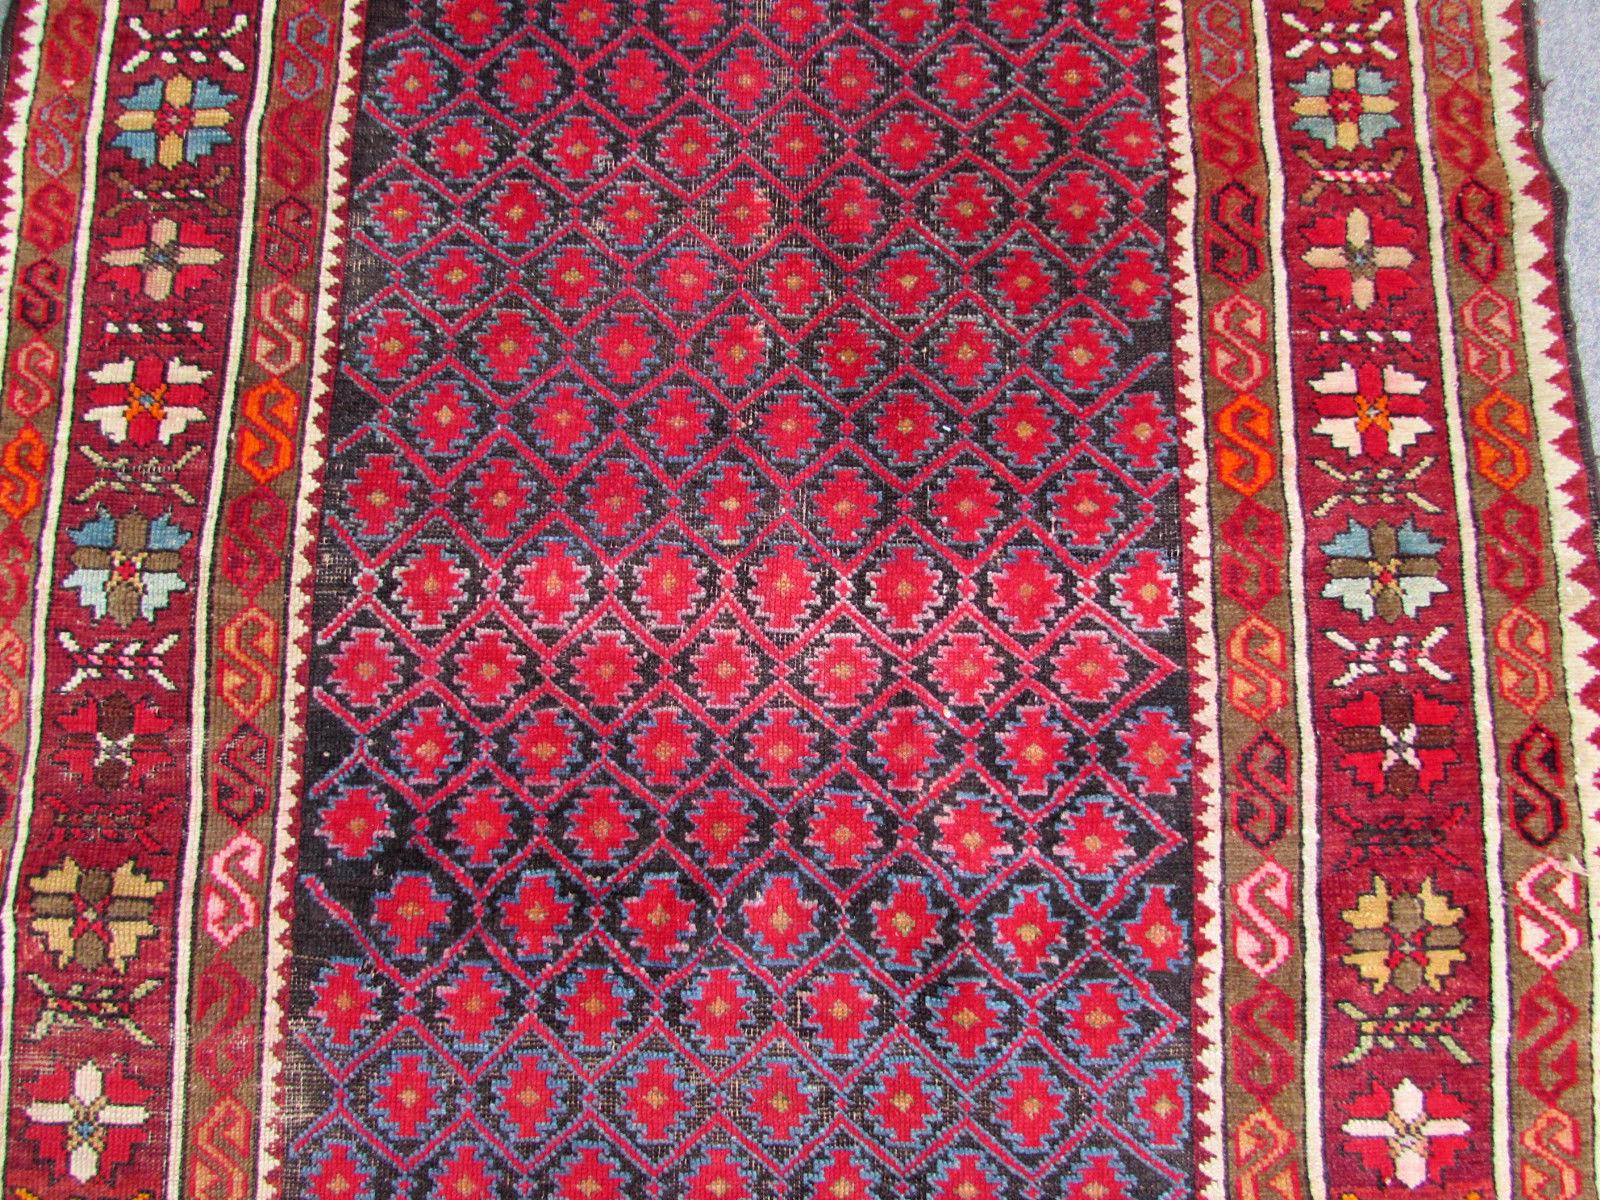 Handmade antique Baluch rug from Afghanistan in all-over design. The rug is in original condition, some low pile.

-Condition: original, some low pile,

-circa 1910s,

-Size: 3.1' x 5.9' (93cm x 173cm),

-Material: wool,

-Country of